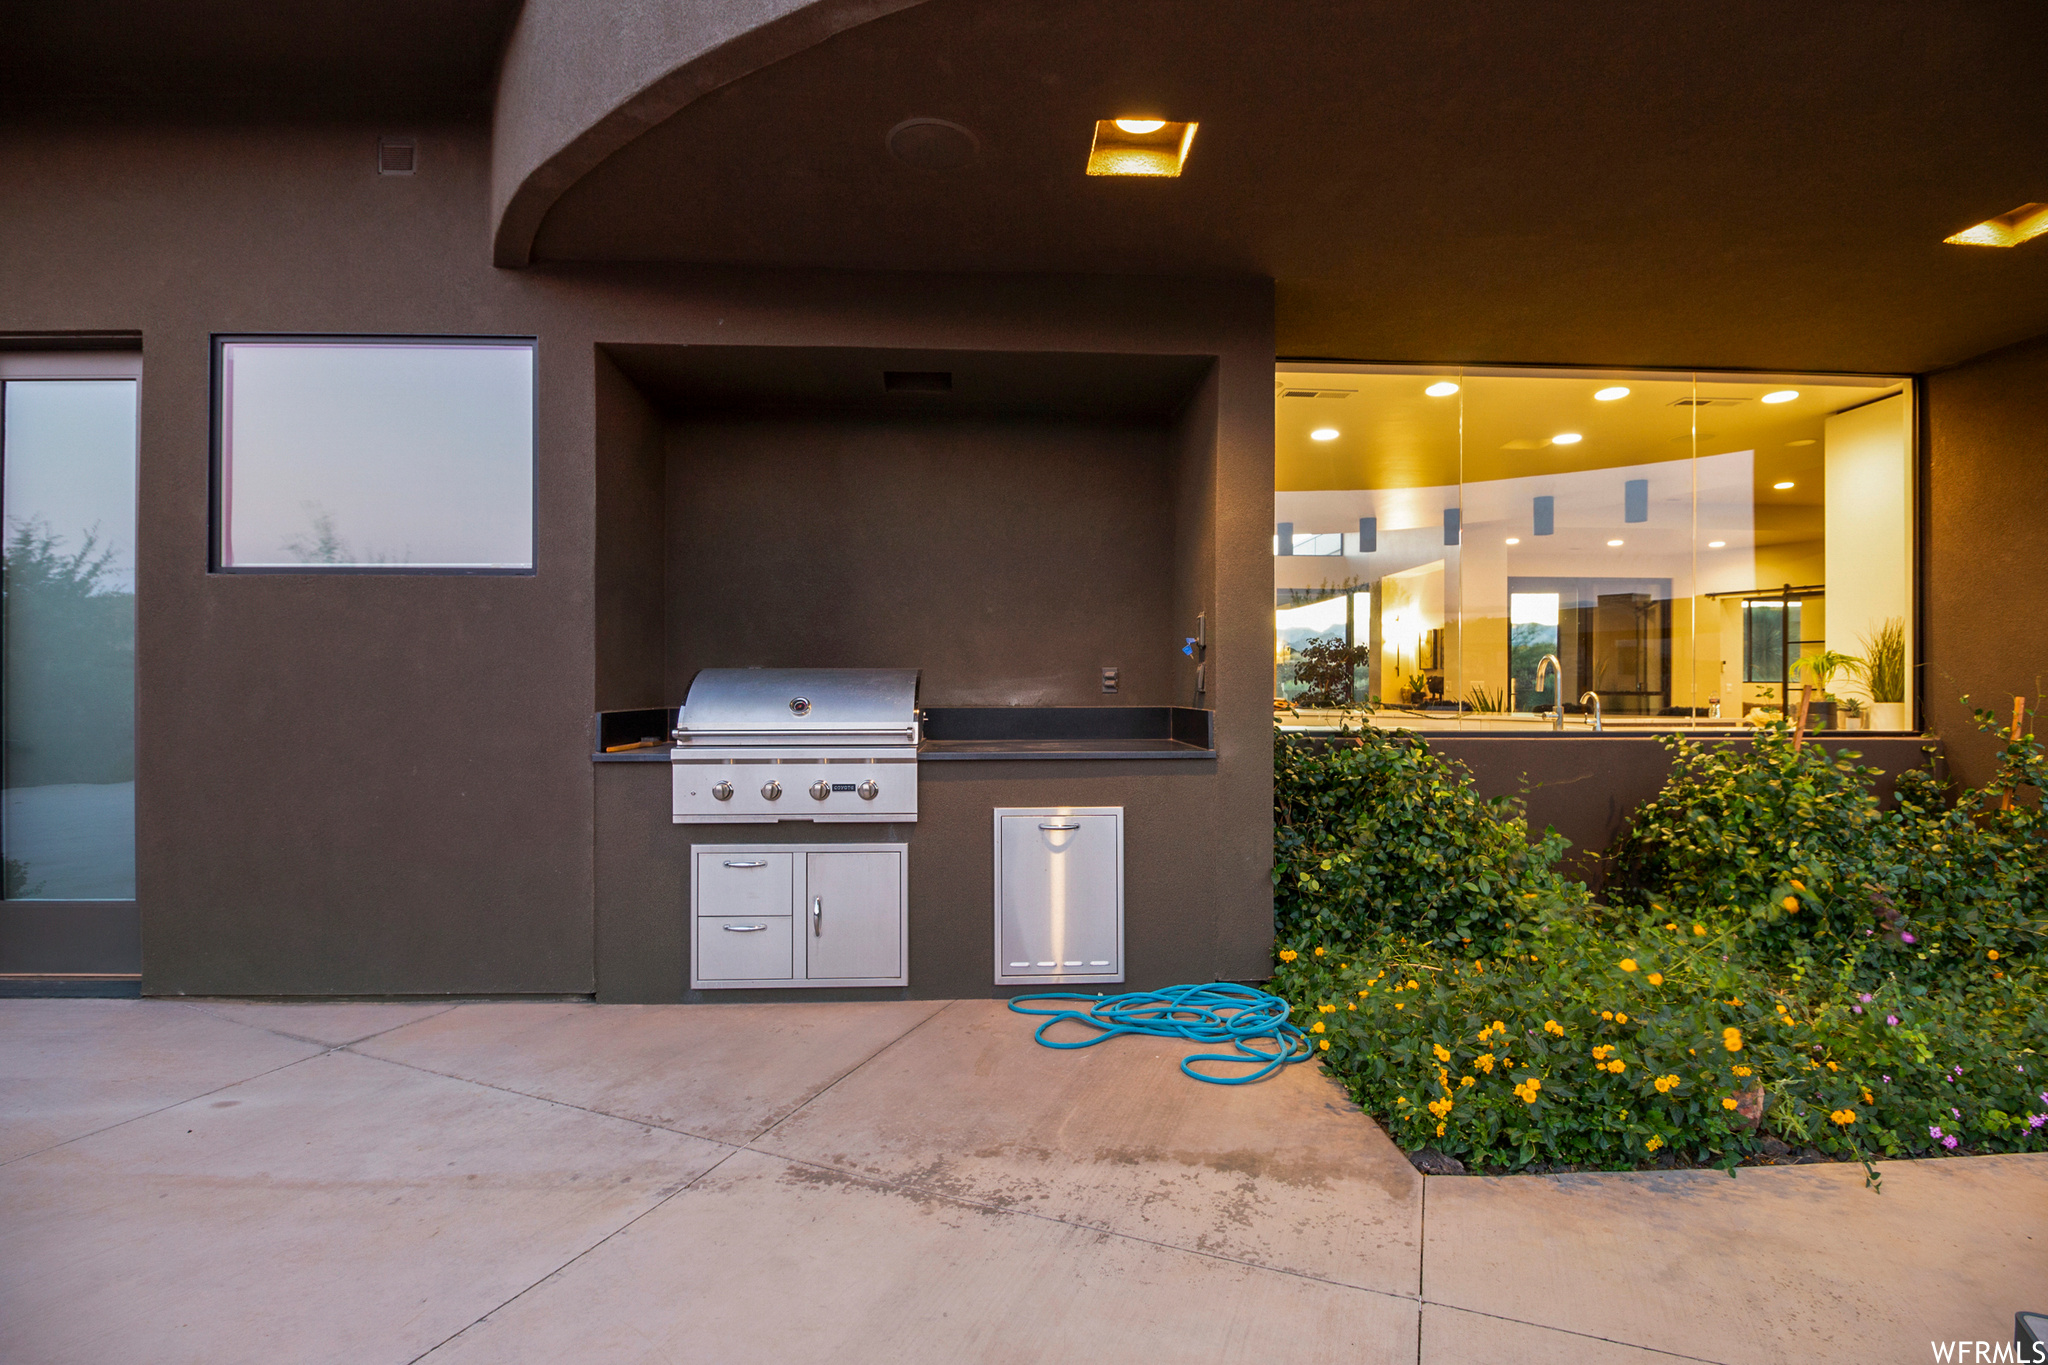 View of patio with an outdoor kitchen and a grill